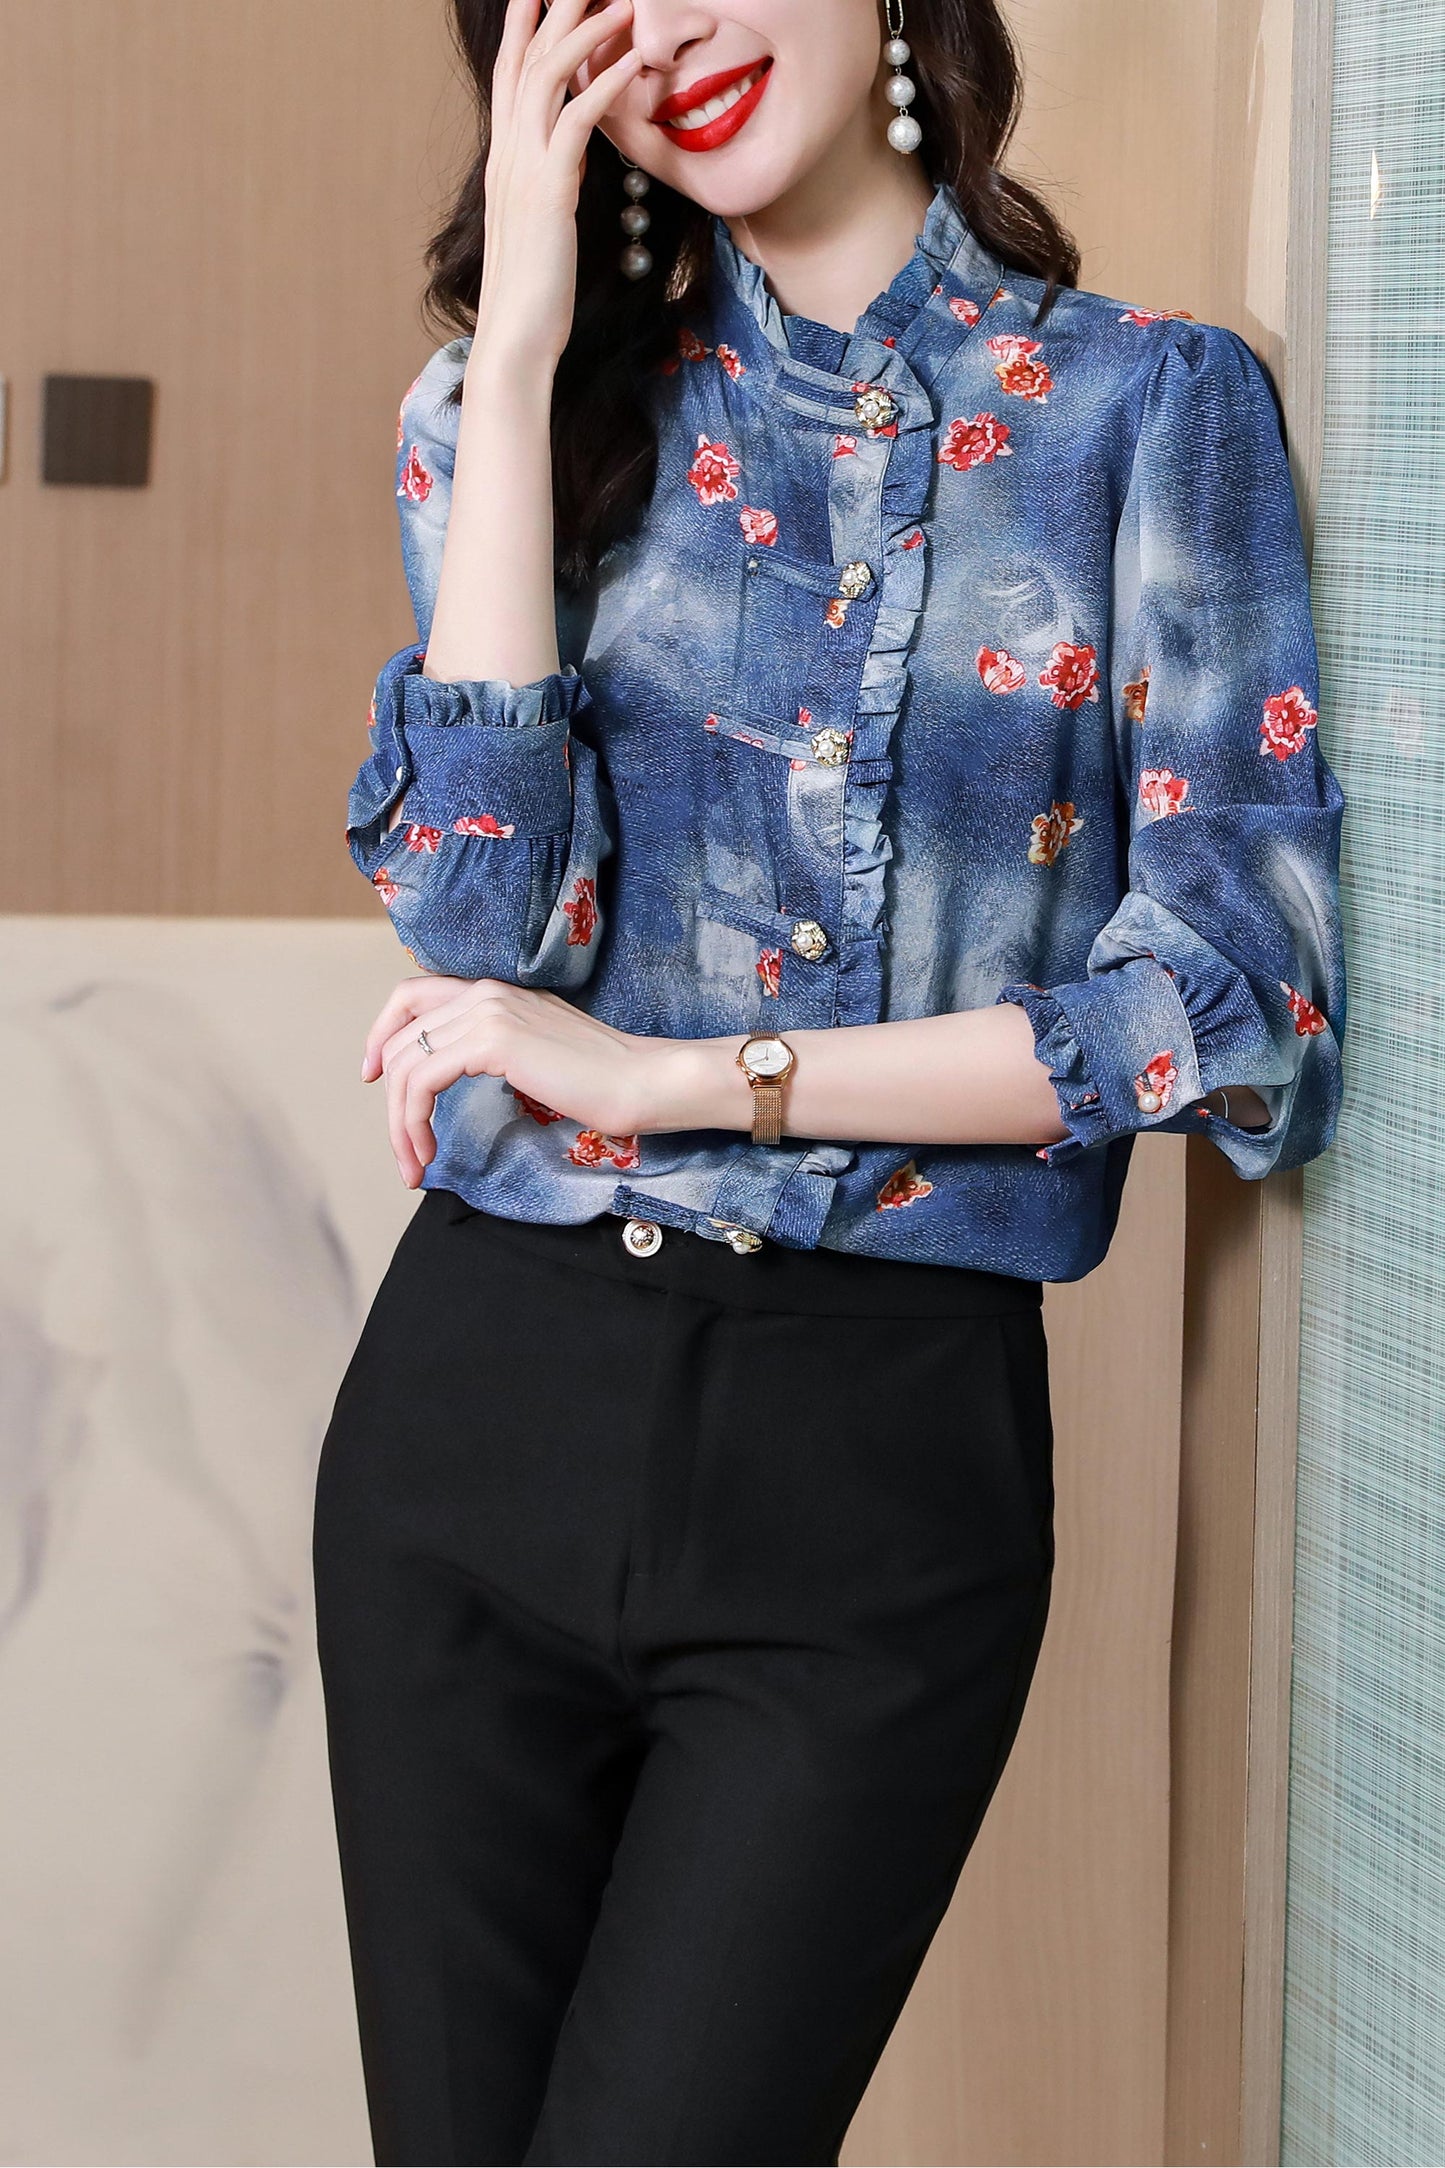 Women's Satin Blouse Chinese style Button Casual Tops